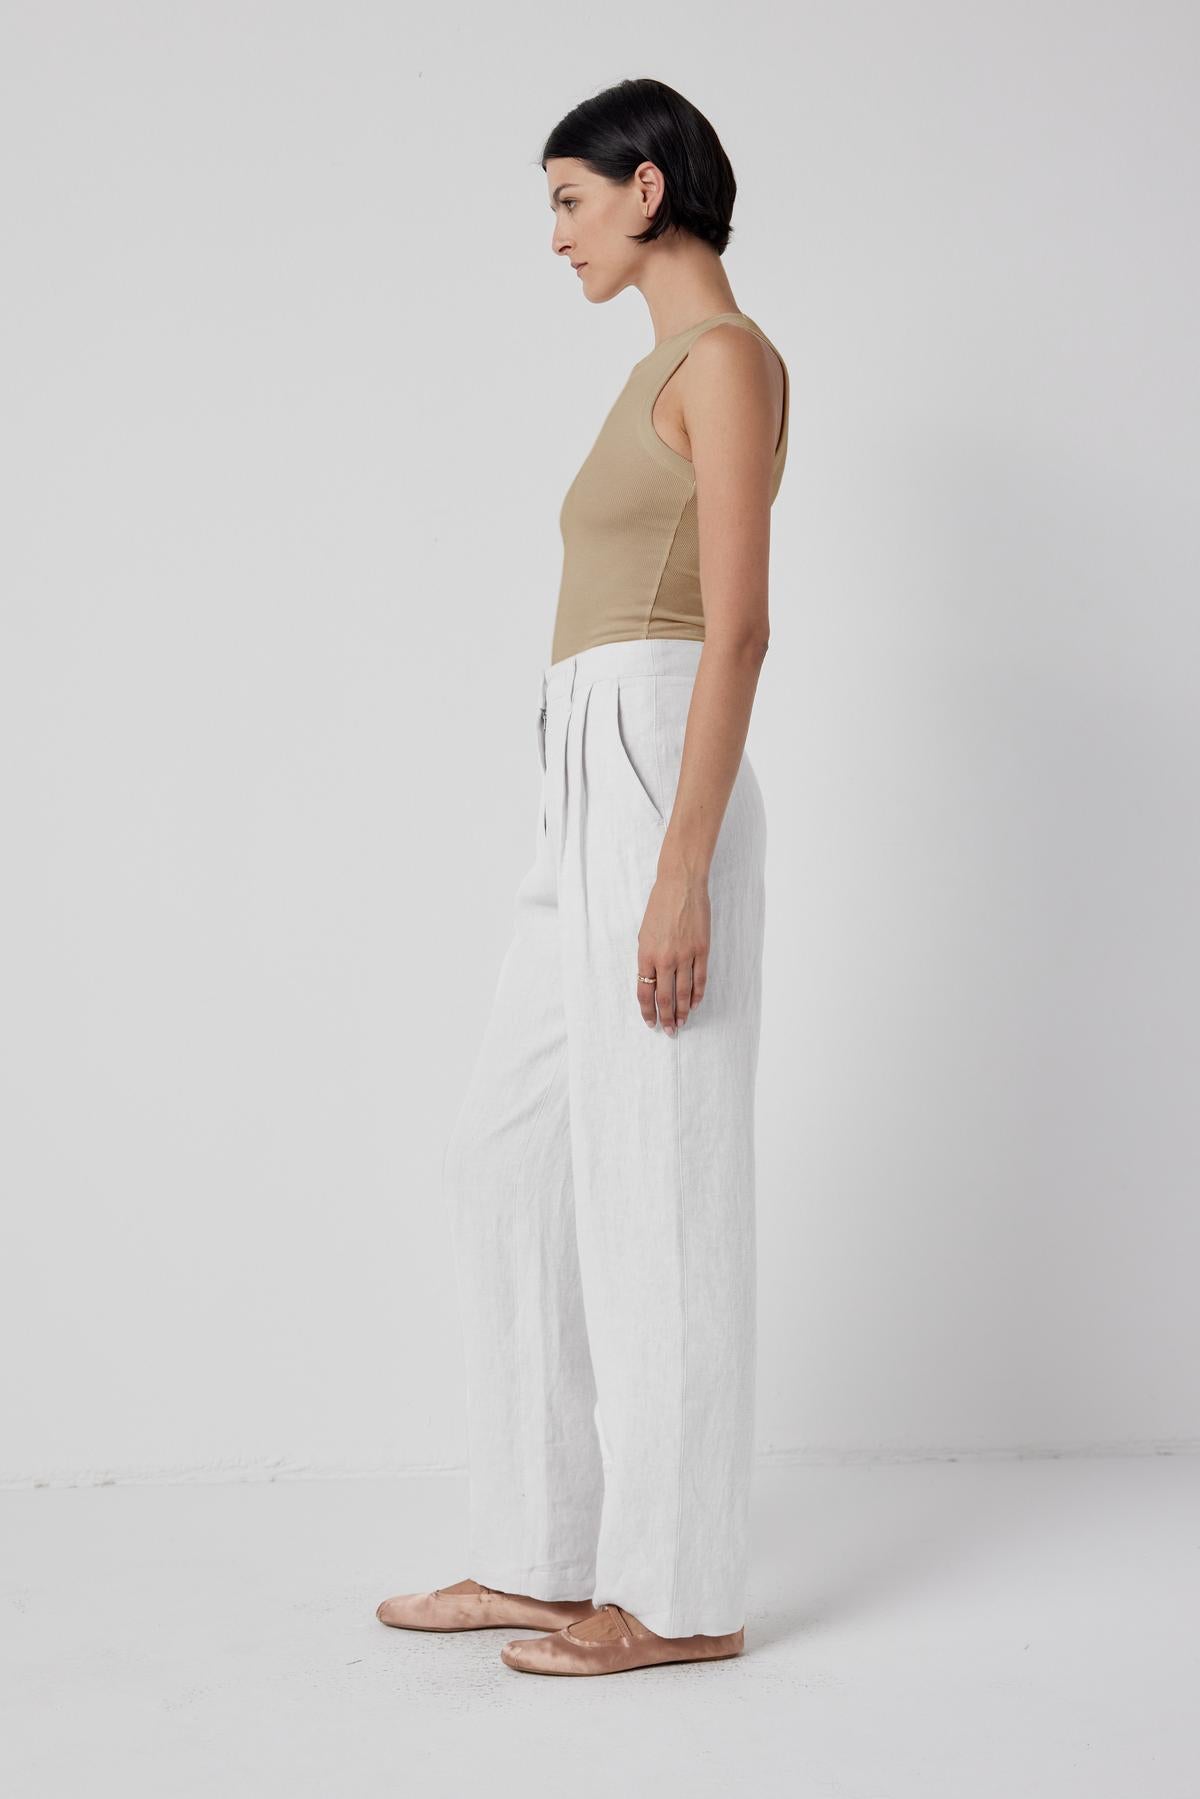 Woman standing in profile wearing a chic beige Velvet by Jenny Graham Cruz tank top and white stretch fit trousers against a white background.-36463435251905